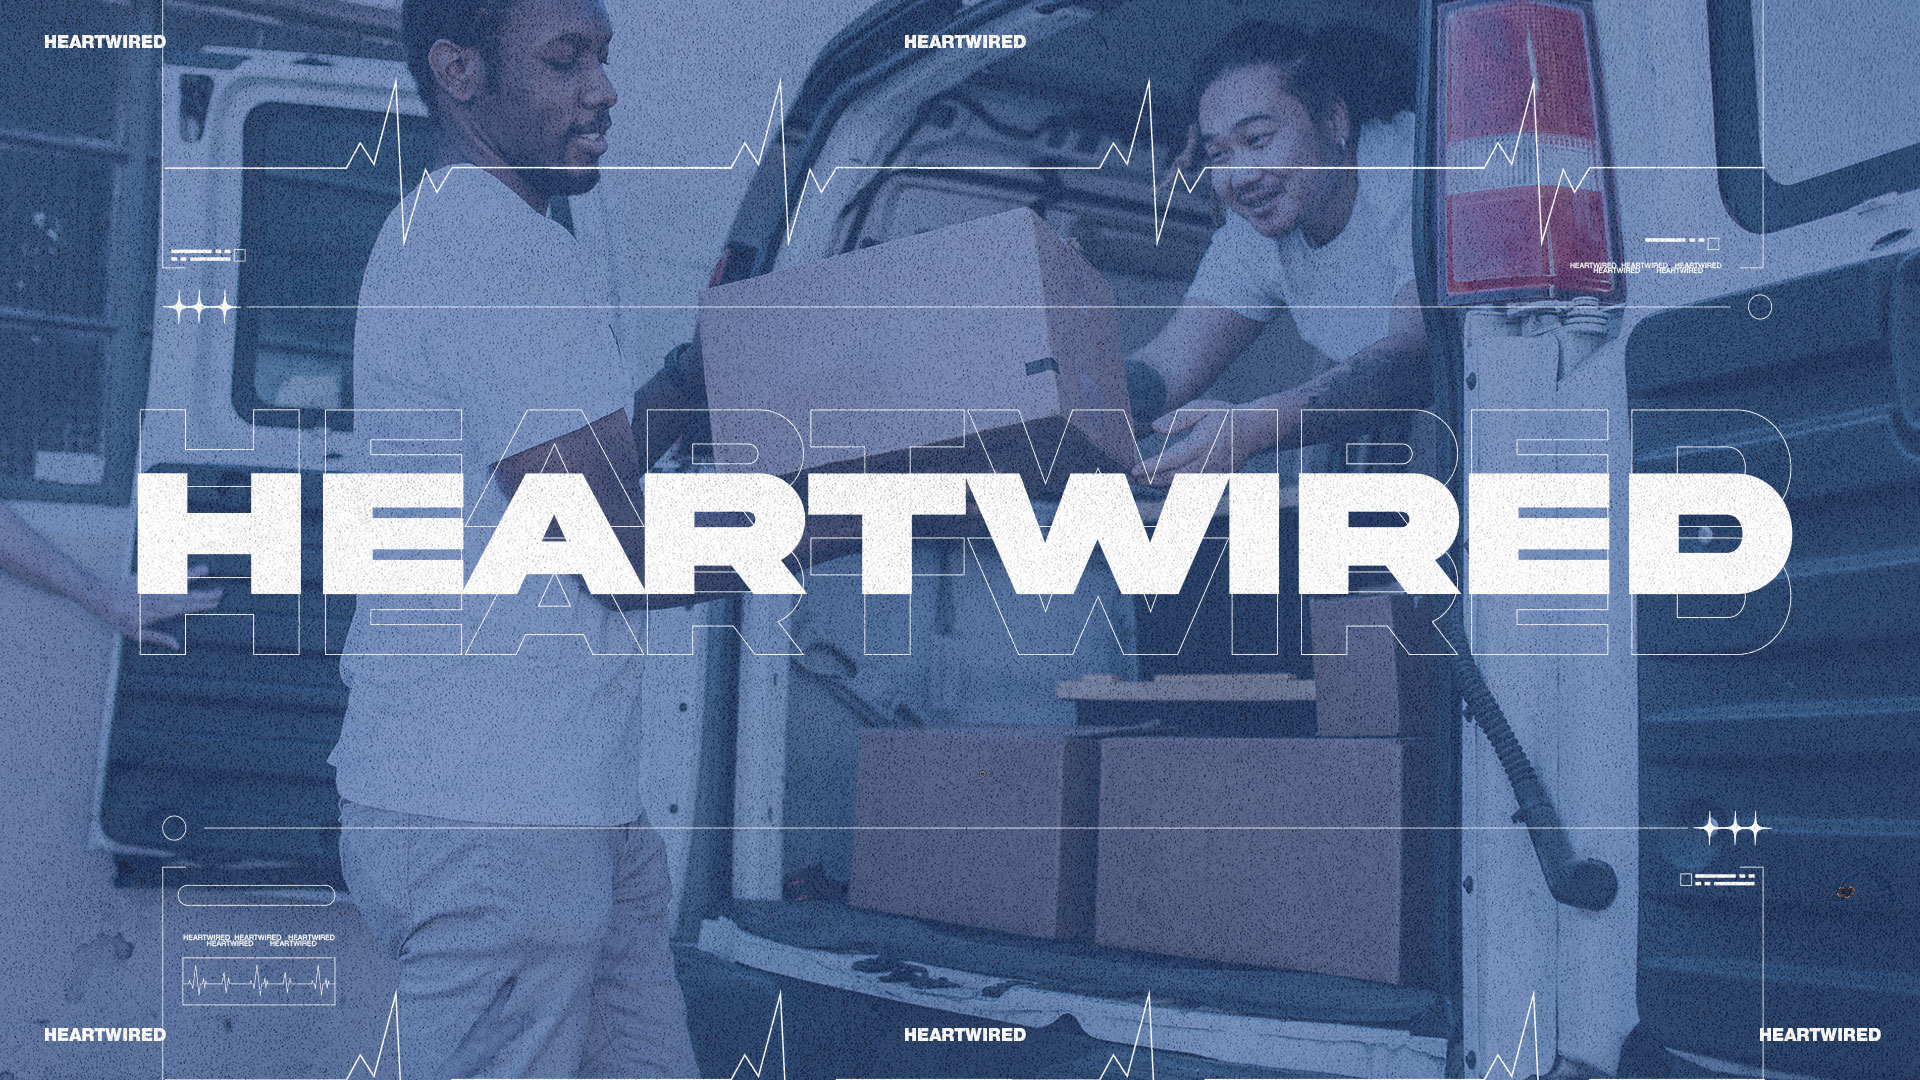   Heartwired